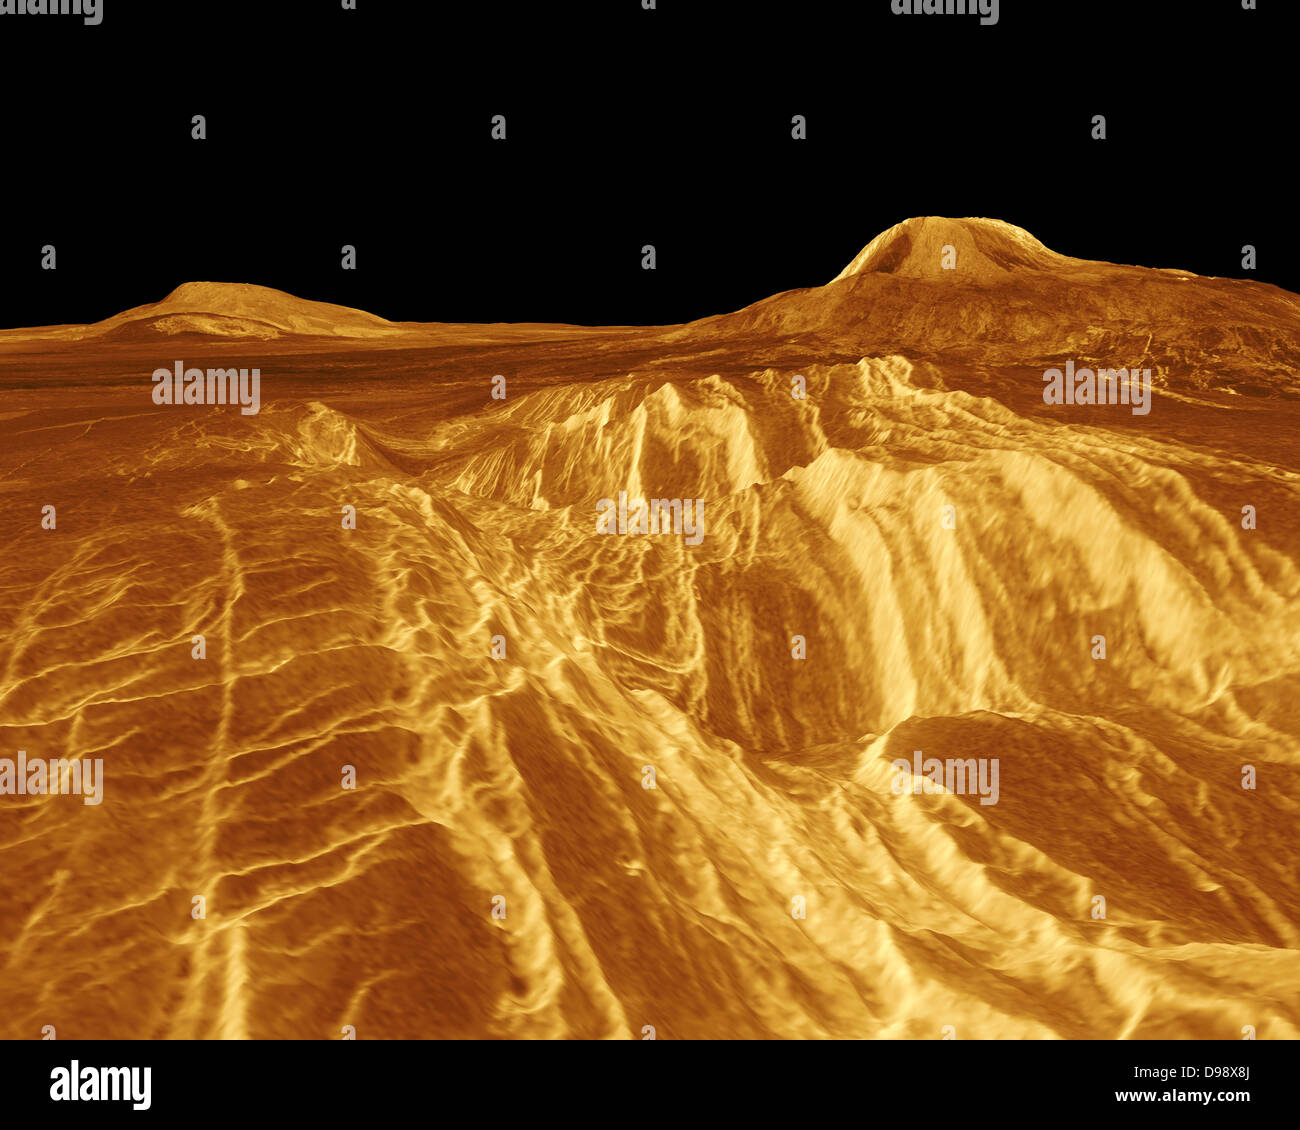 A portion of western Eistla Regio is shown in this three dimensional, computer-generated view of the surface of Venus. The Stock Photo